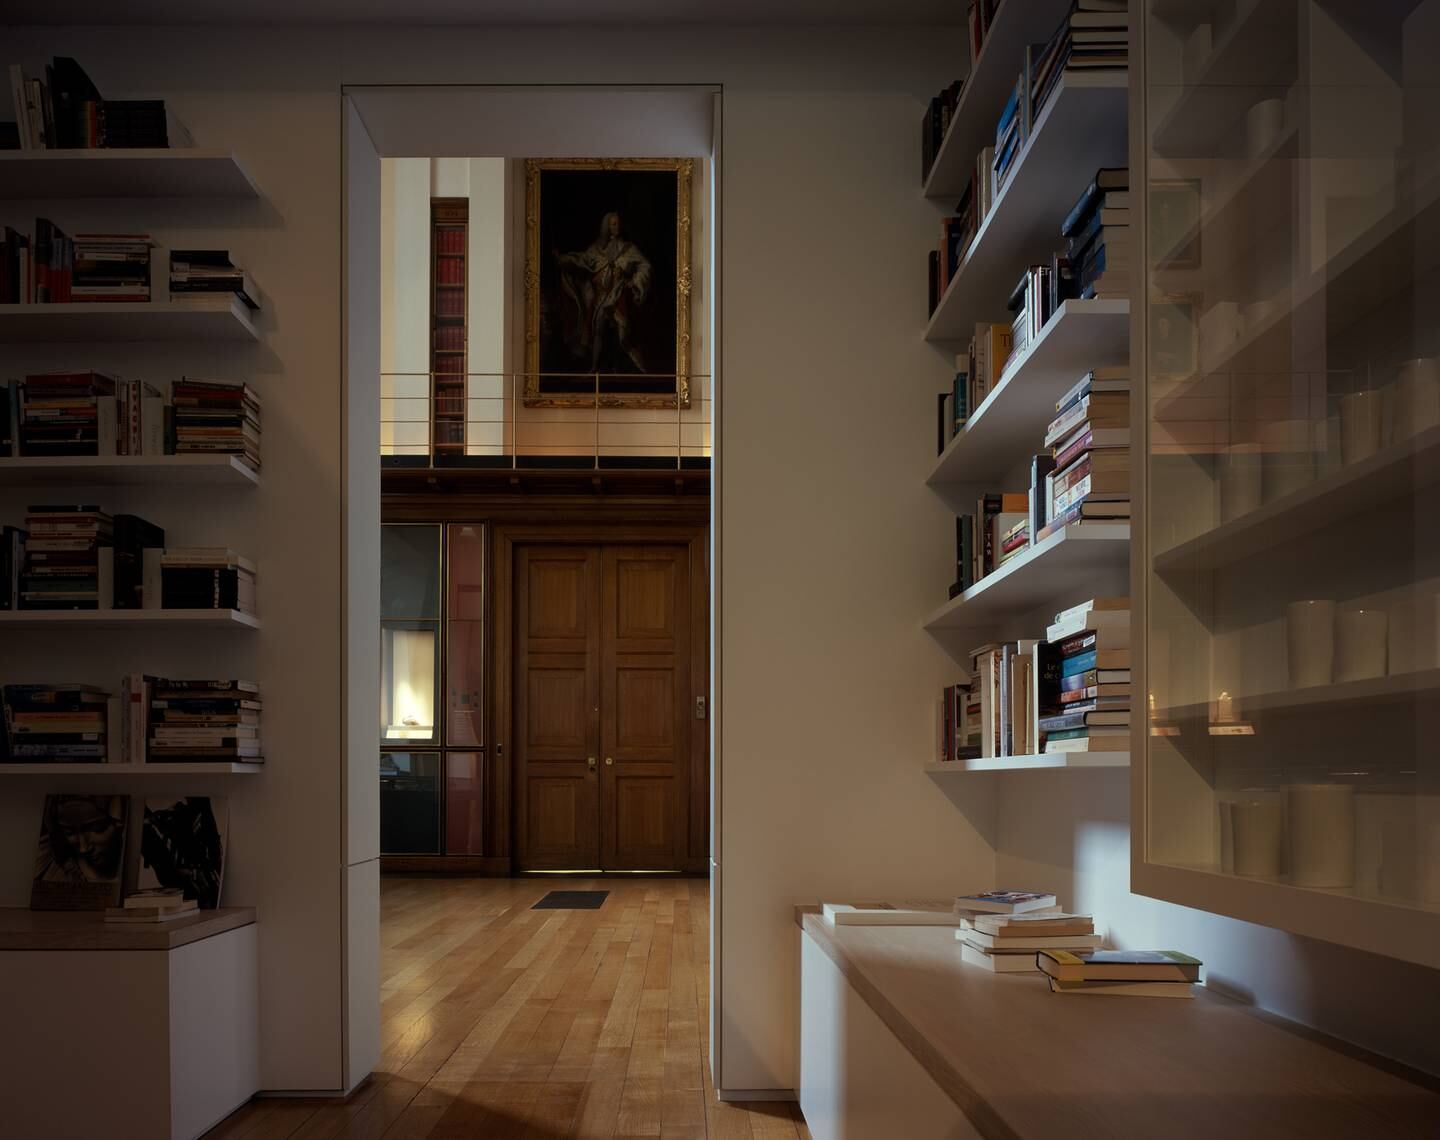 Edmund de Waal's library of exile at The British Museum. Photo: Helen Binet